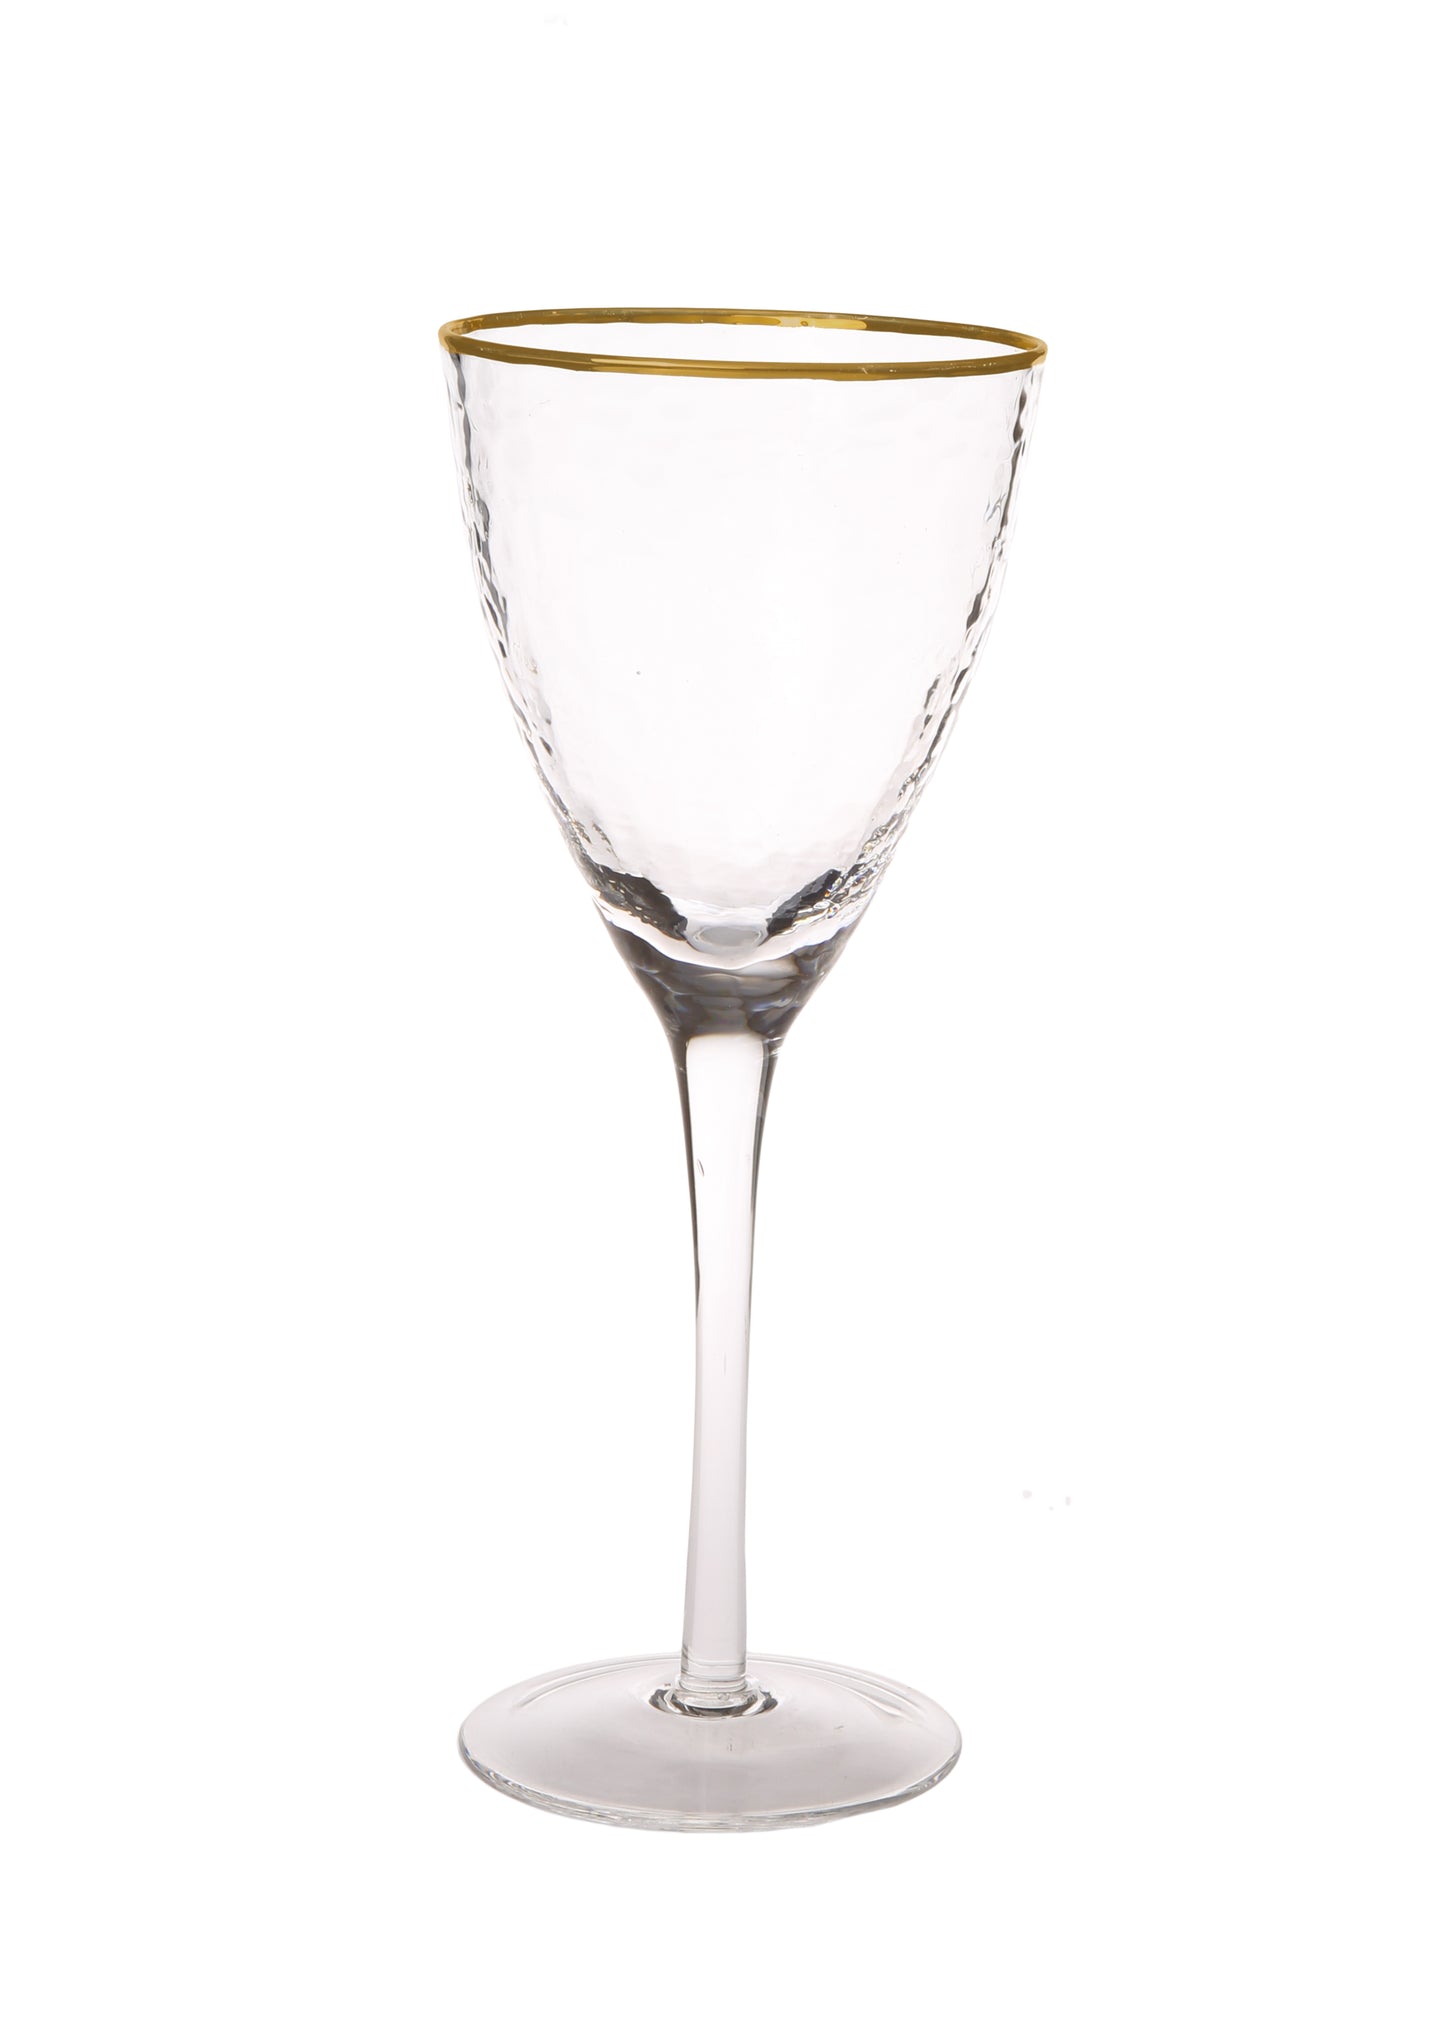 Set Of 6 Water Glasses With Simple Gold Design - 3.75